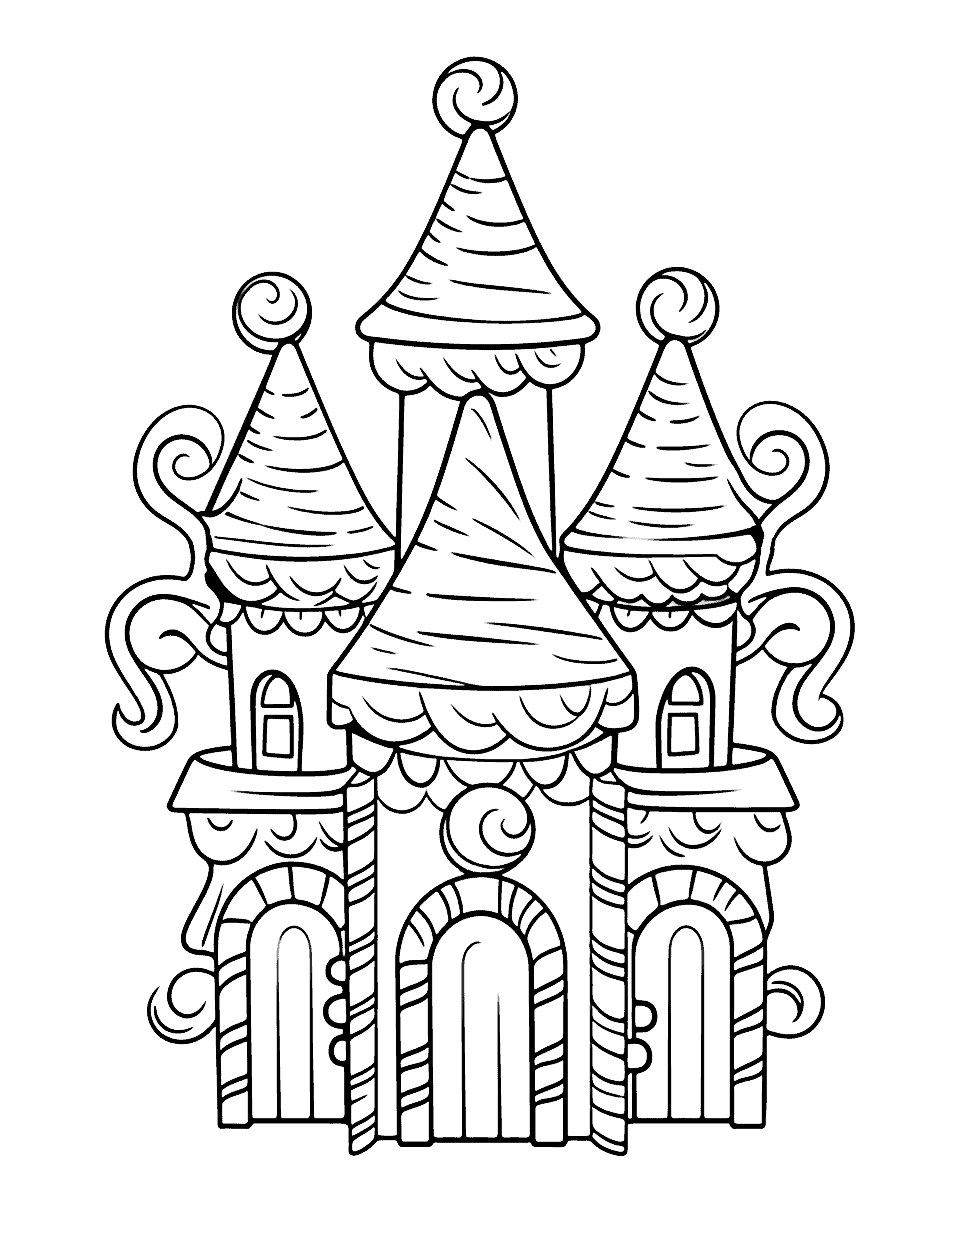 Gingerbread Castle Christmas Coloring Page - A castle with candy decorations, fit for a fairy tale.